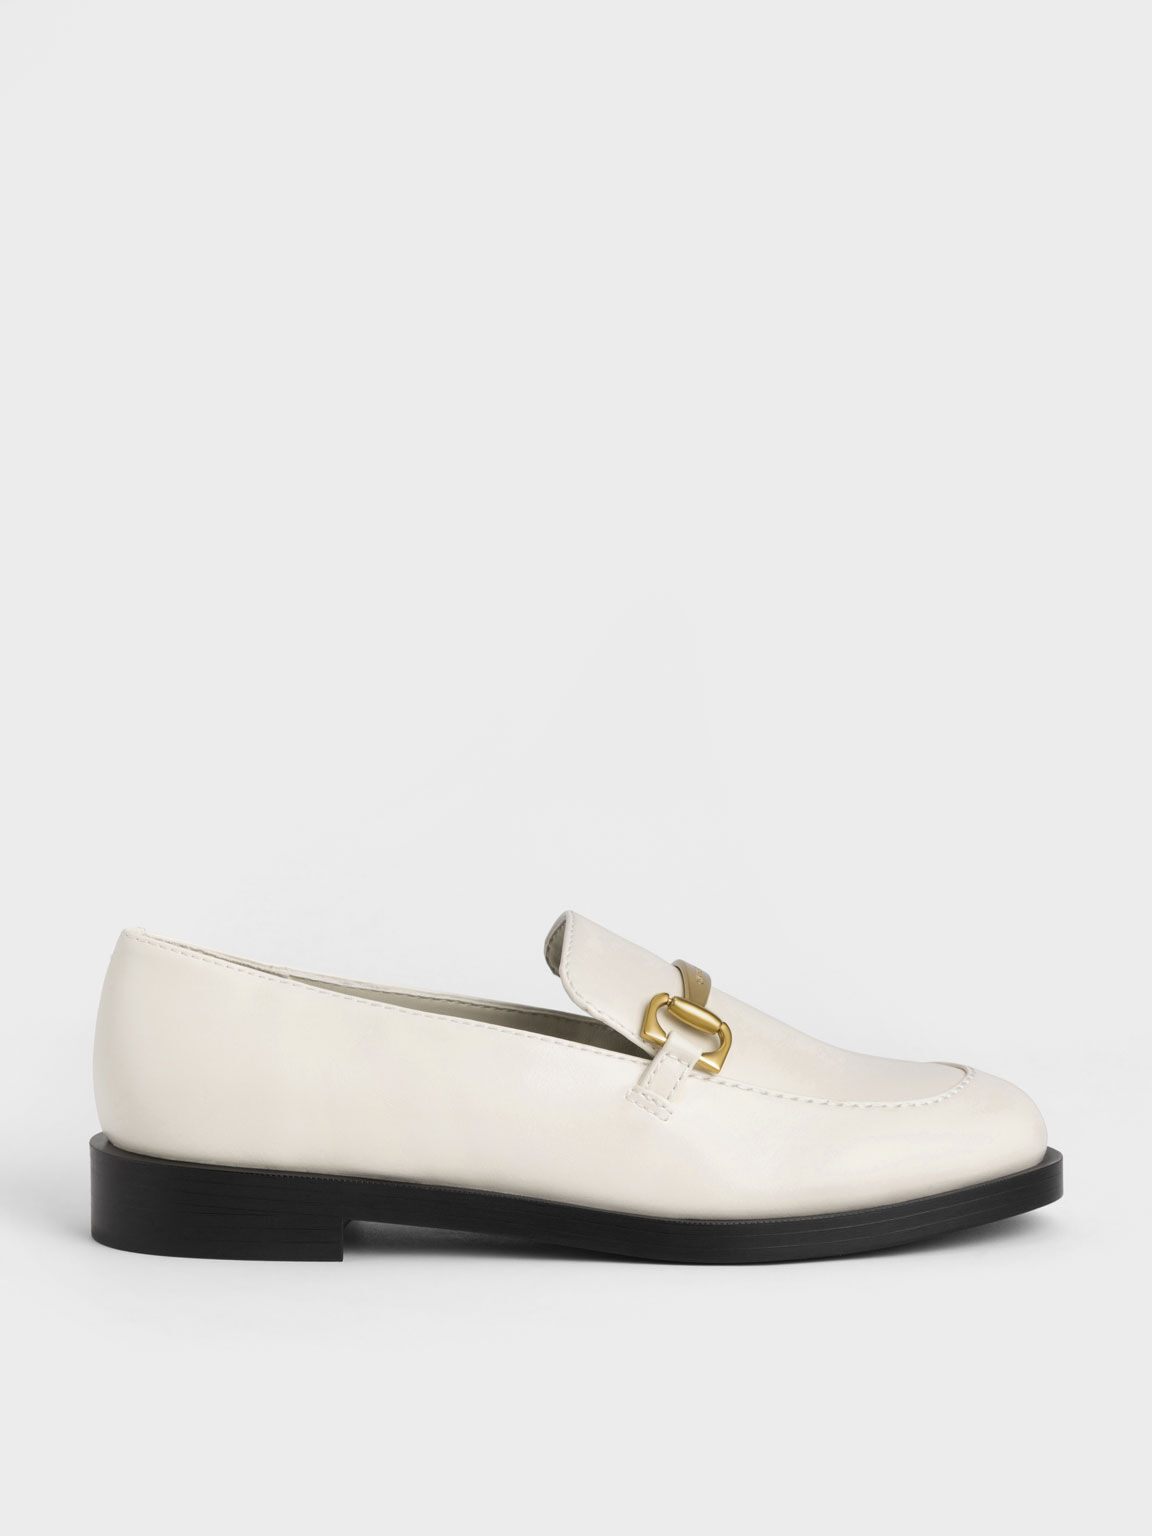 Women's Flat Loafers | Shop Exclusive Styles - CHARLES & KEITH SG